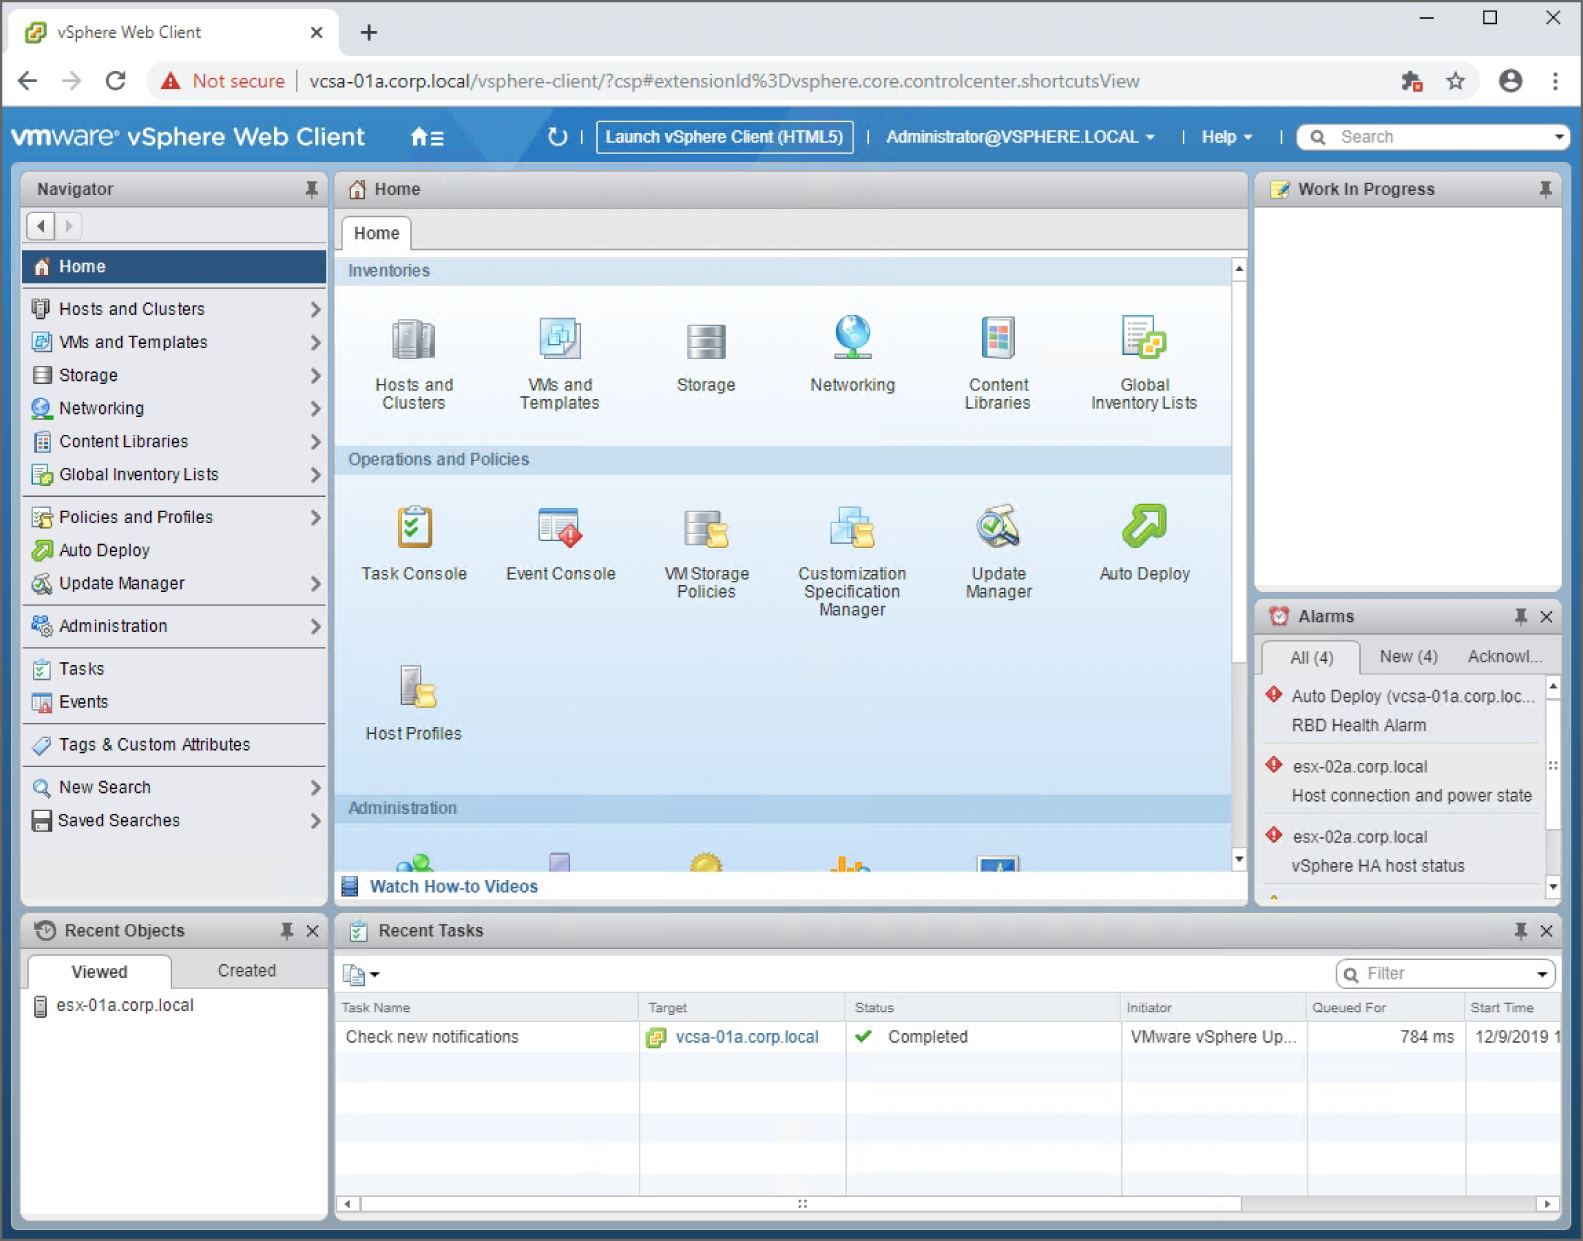 Snapshot of the home page of the Flex vSphere web client.